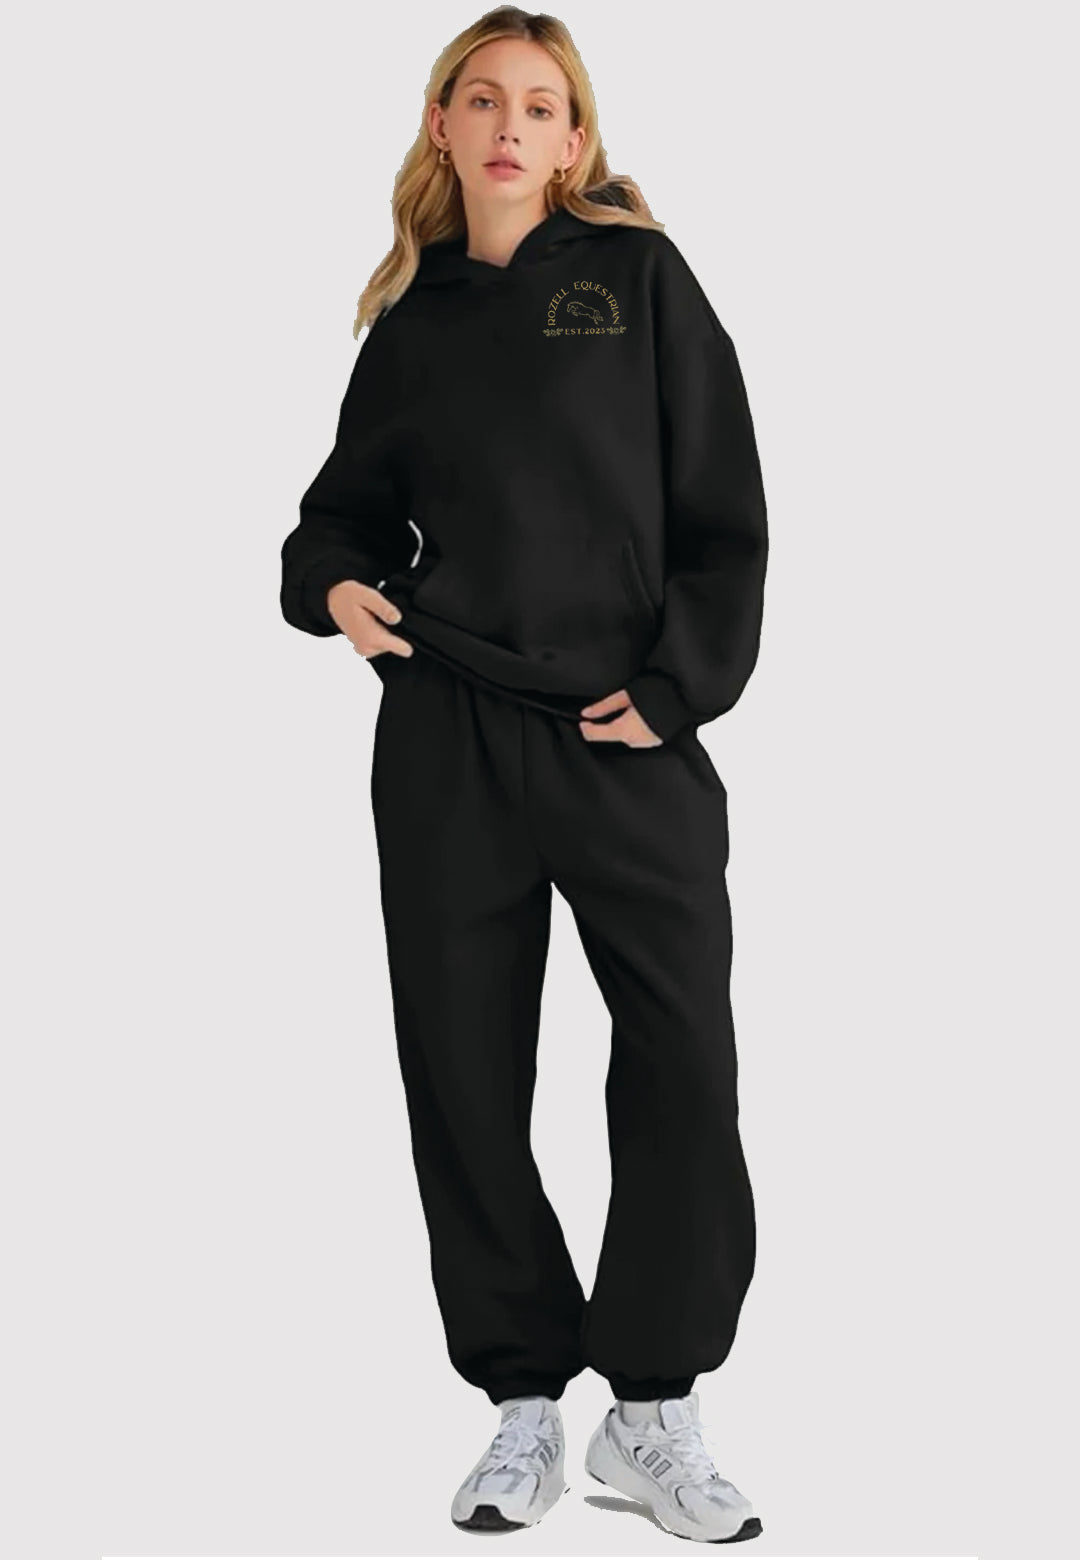 Rozell Equestrian 2-PIECE LOUNGE HOODIE OVERSIZED SWEATSUIT SET, 2 Color Options